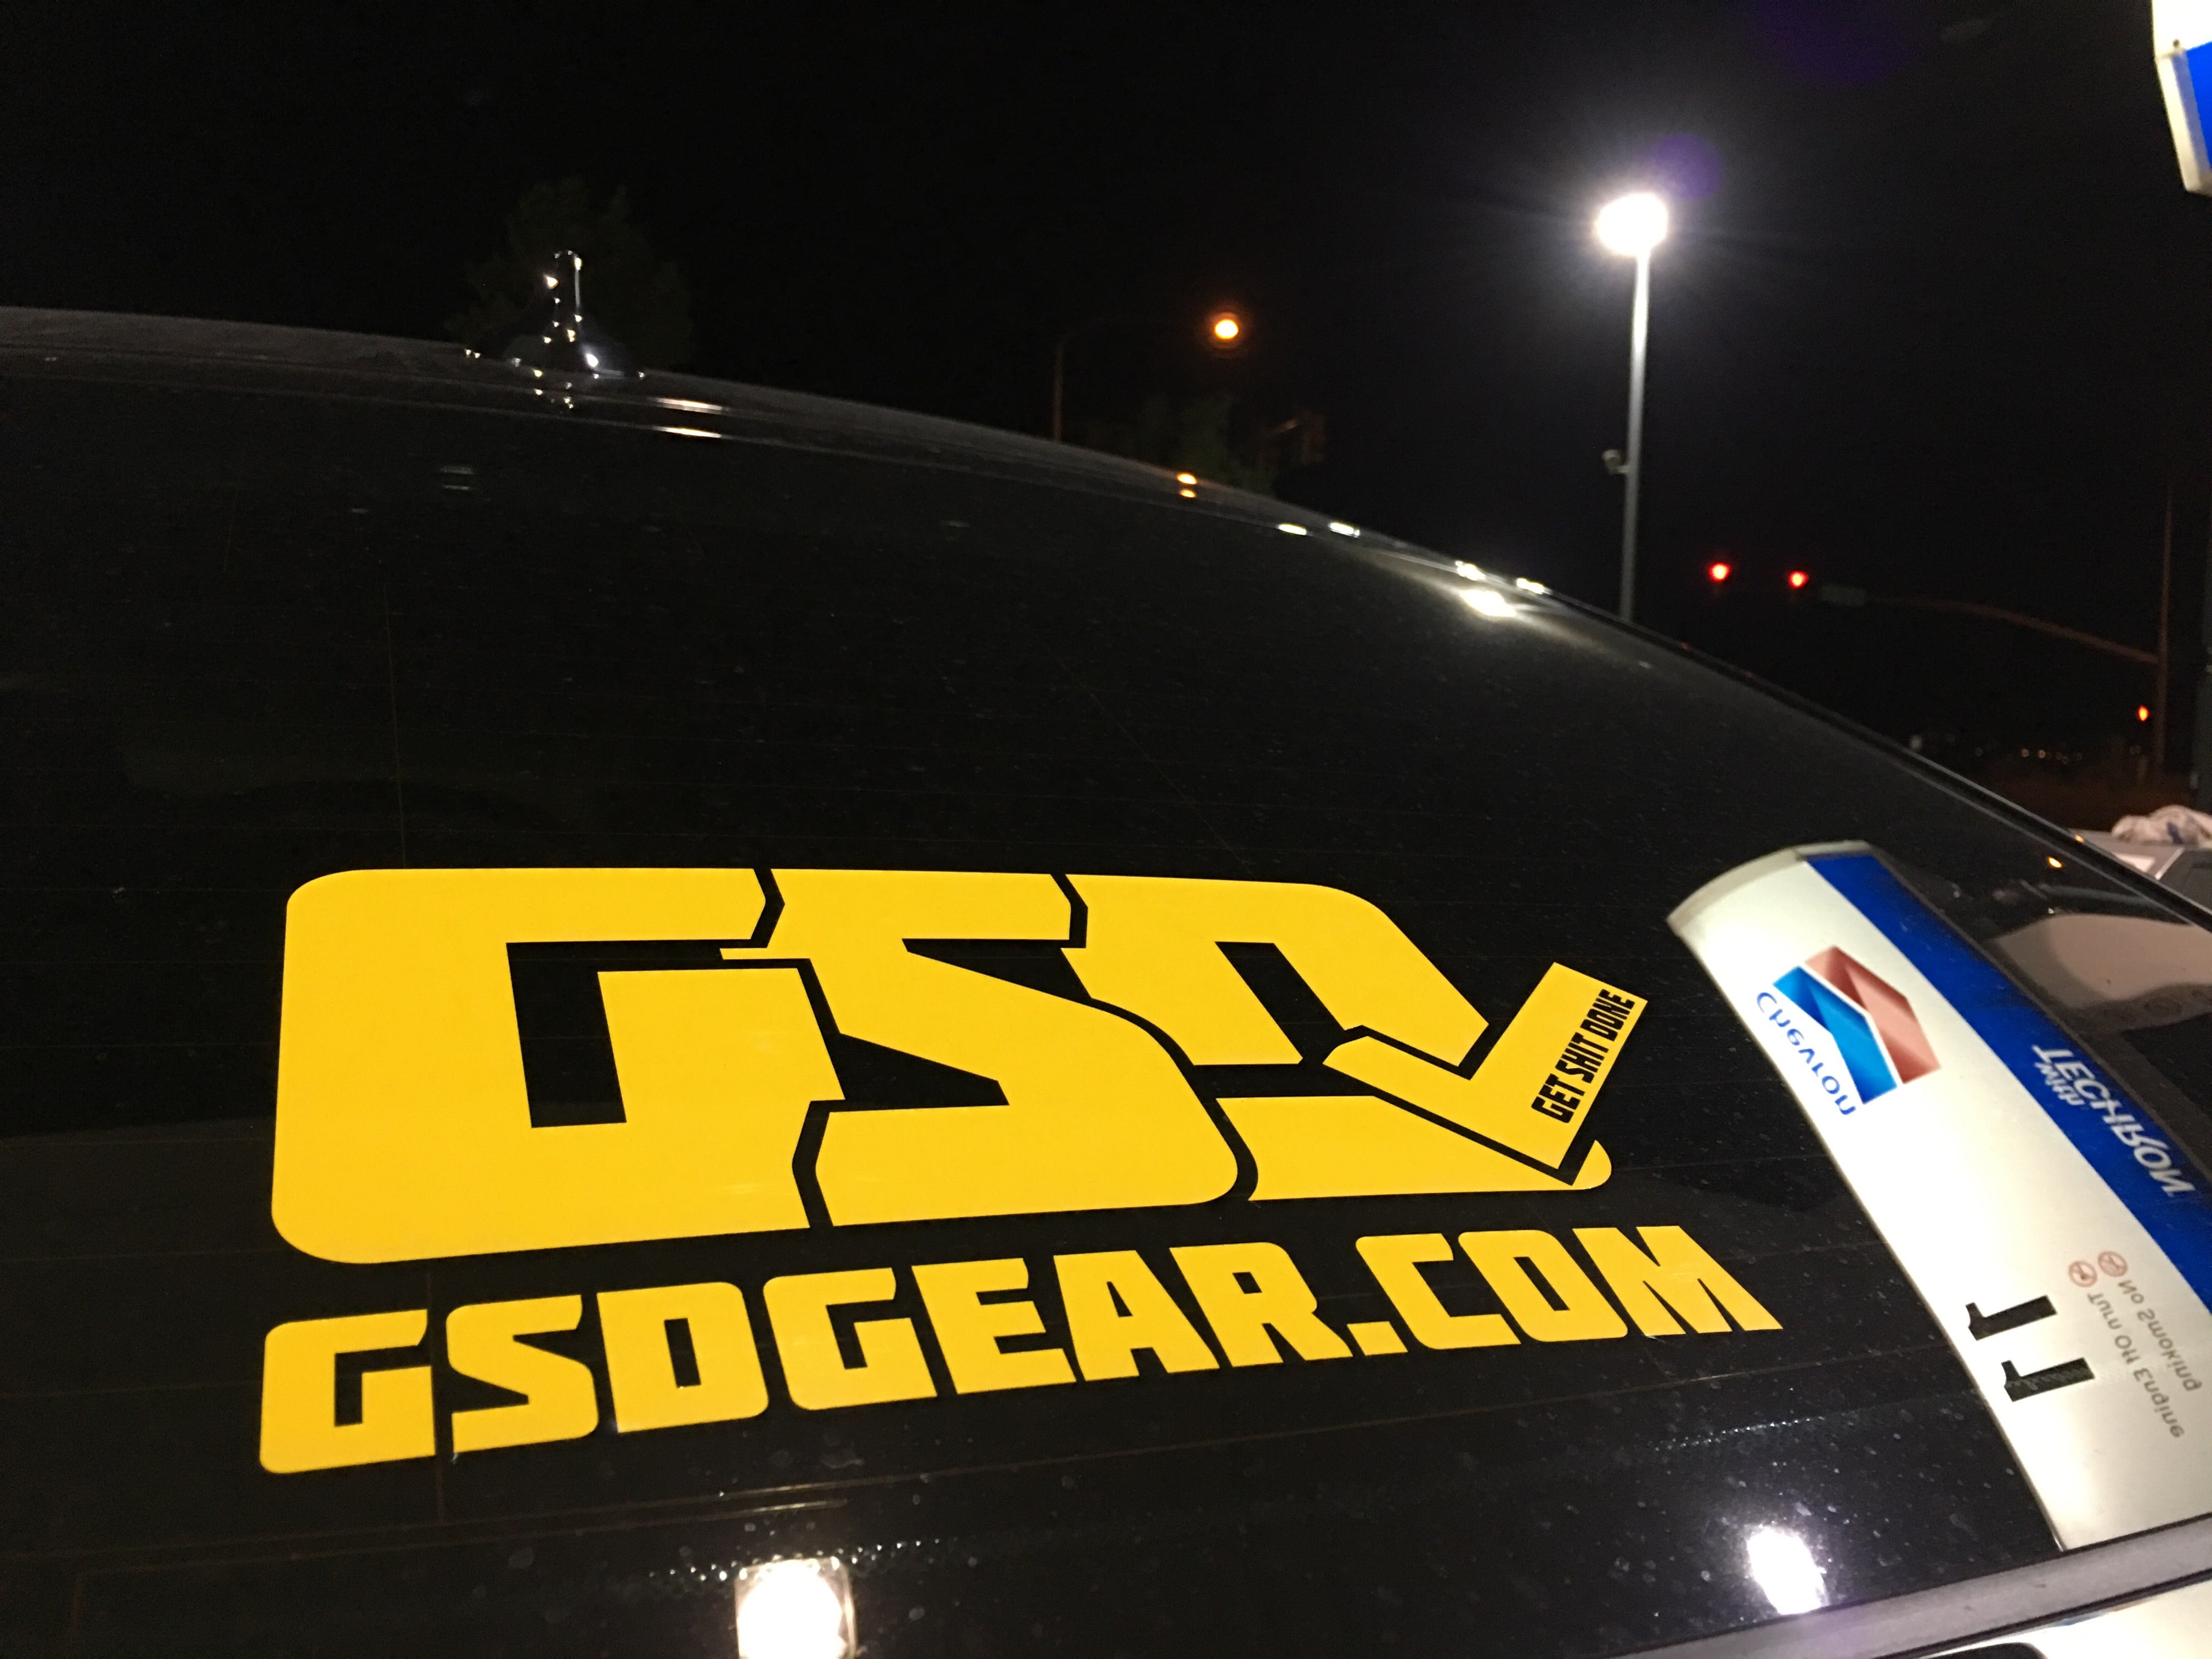 GSD Decal - 12 Inch